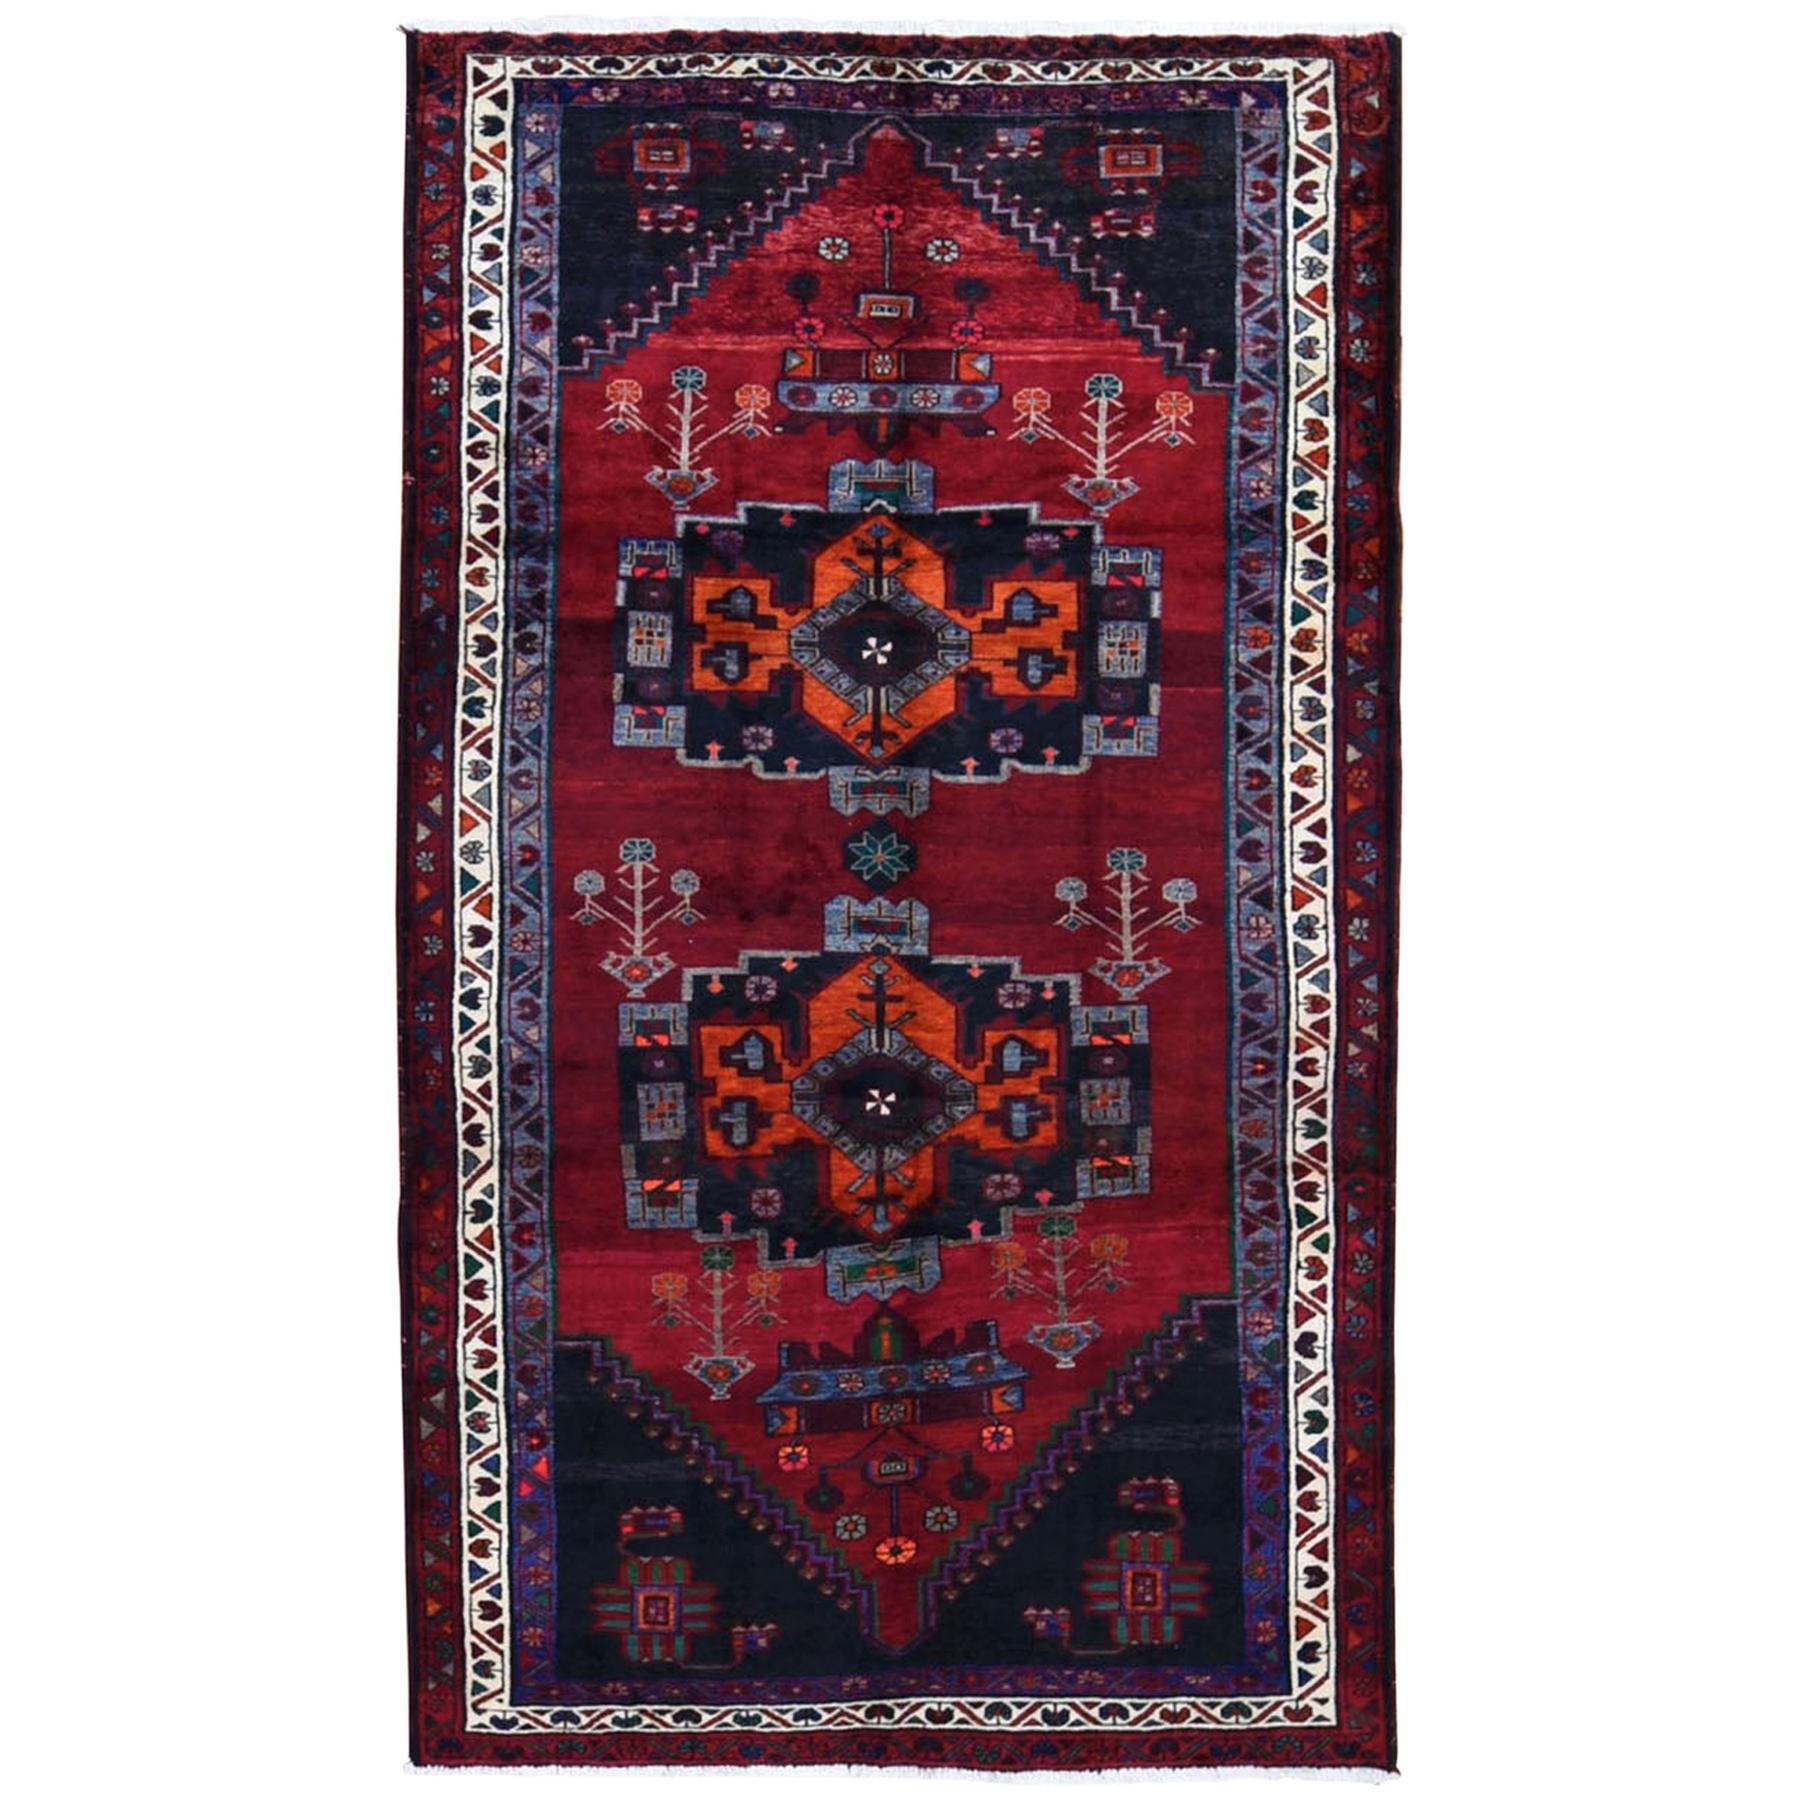 Gallery Size Red Vintage Persian Hamadan Wool Large Elements Hand Knotted Rug